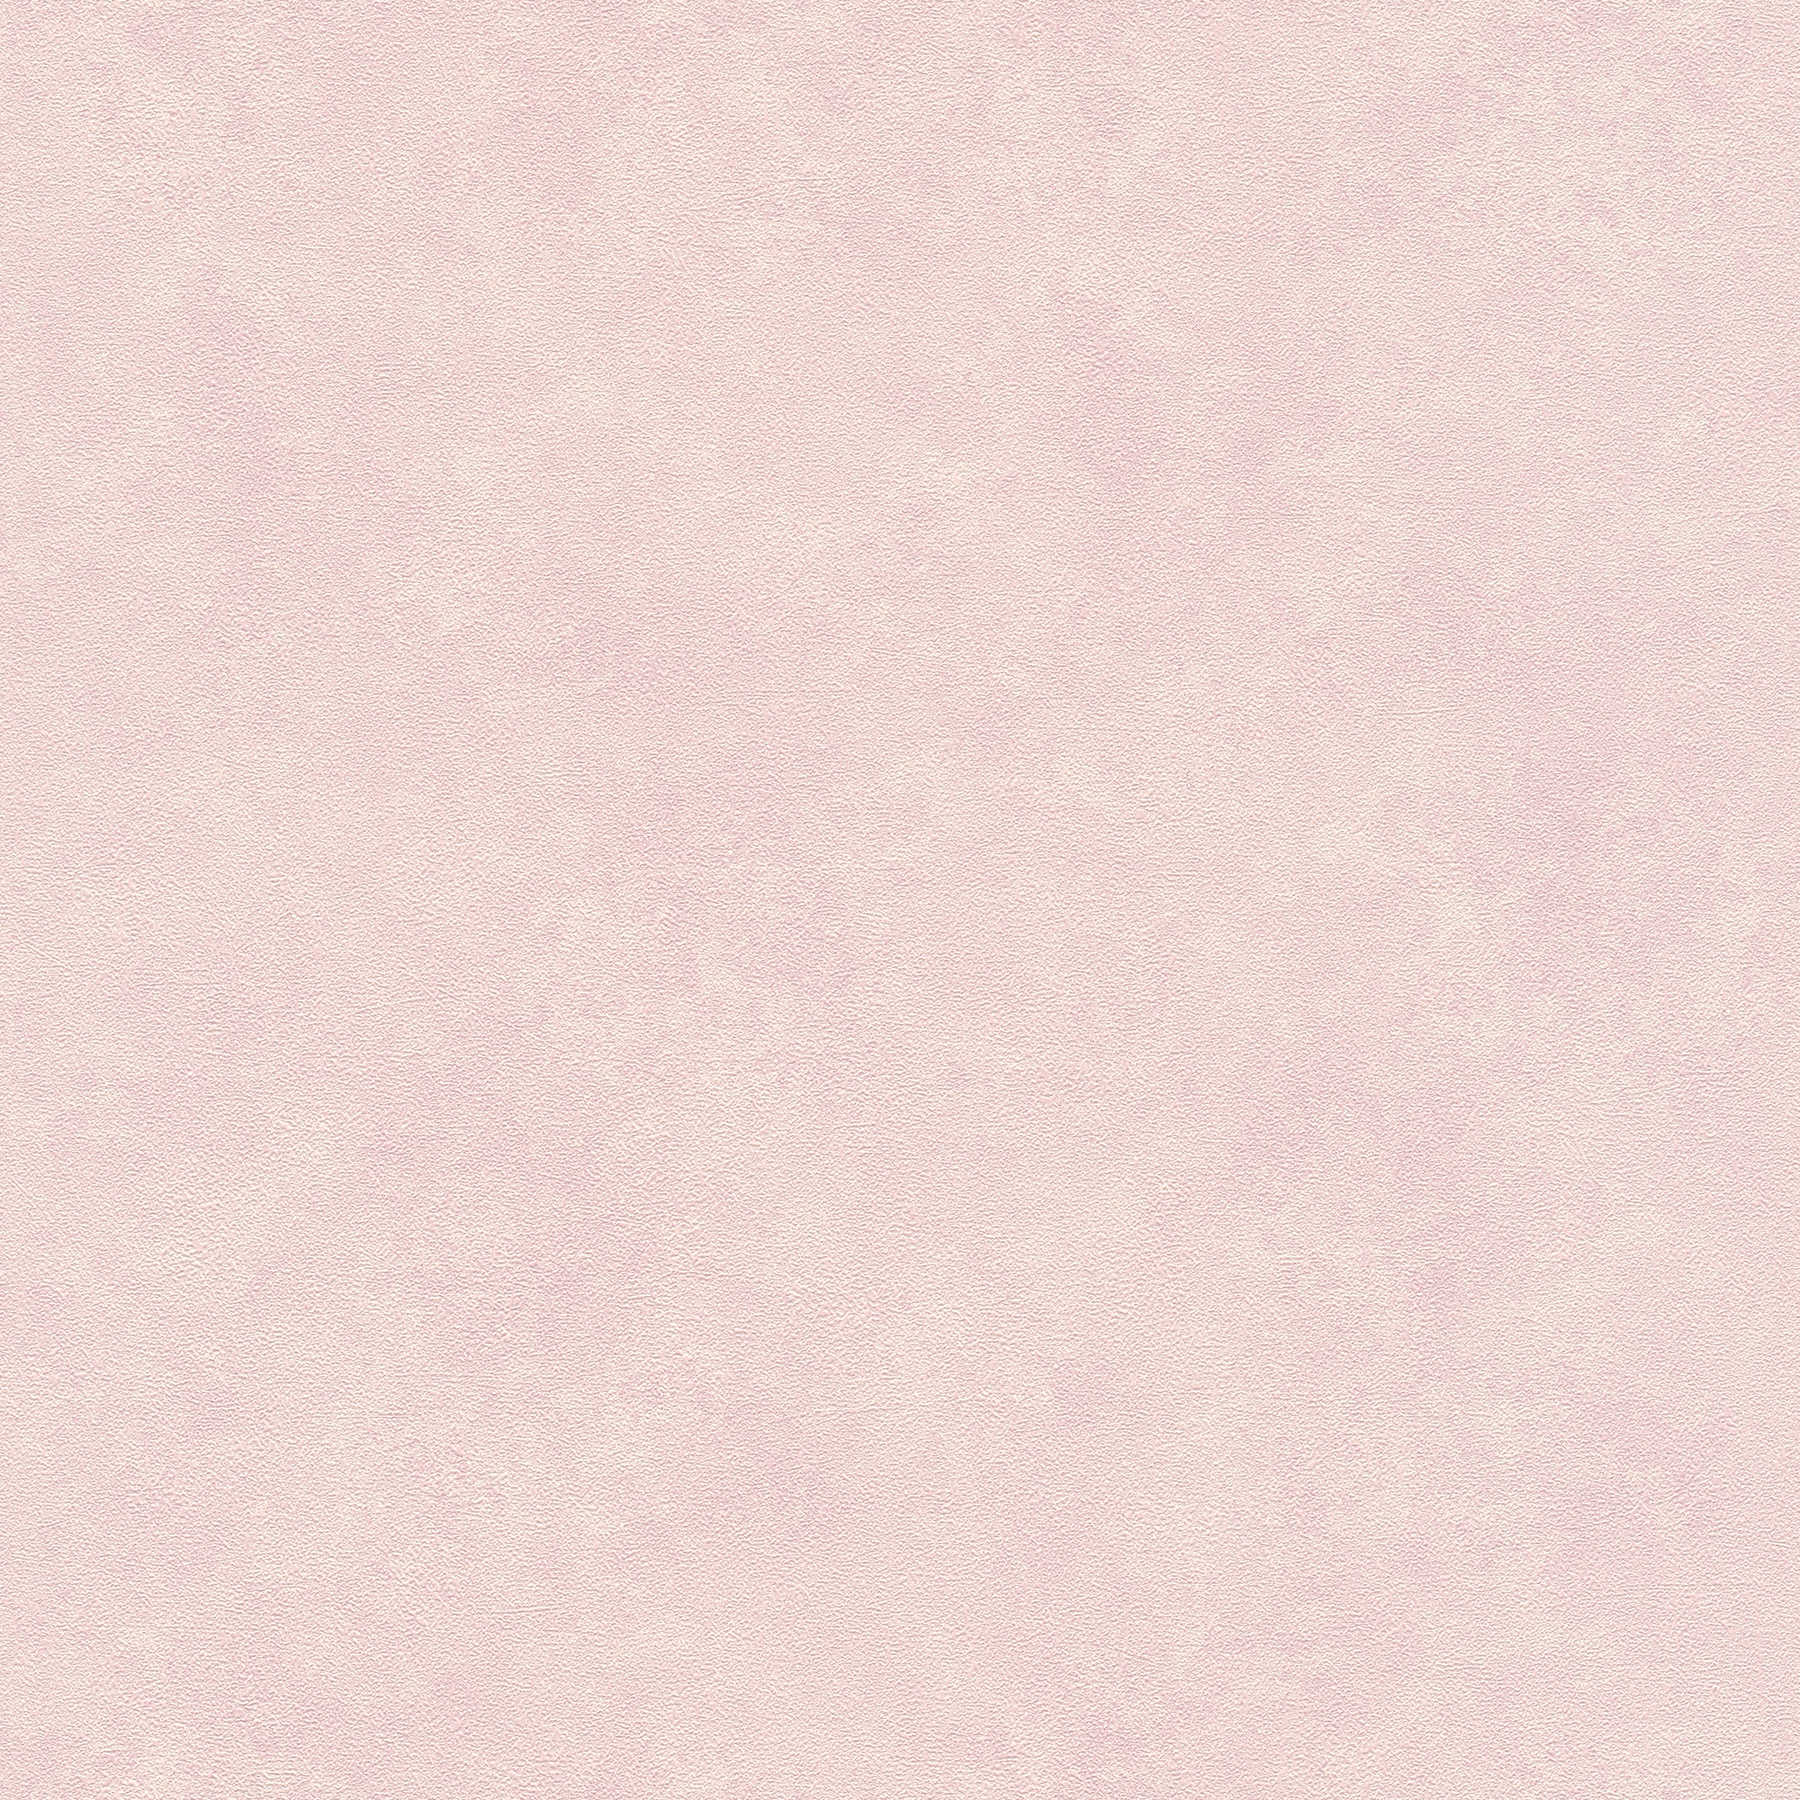         Plain wallpaper colour shaded, natural texture pattern - pink
    